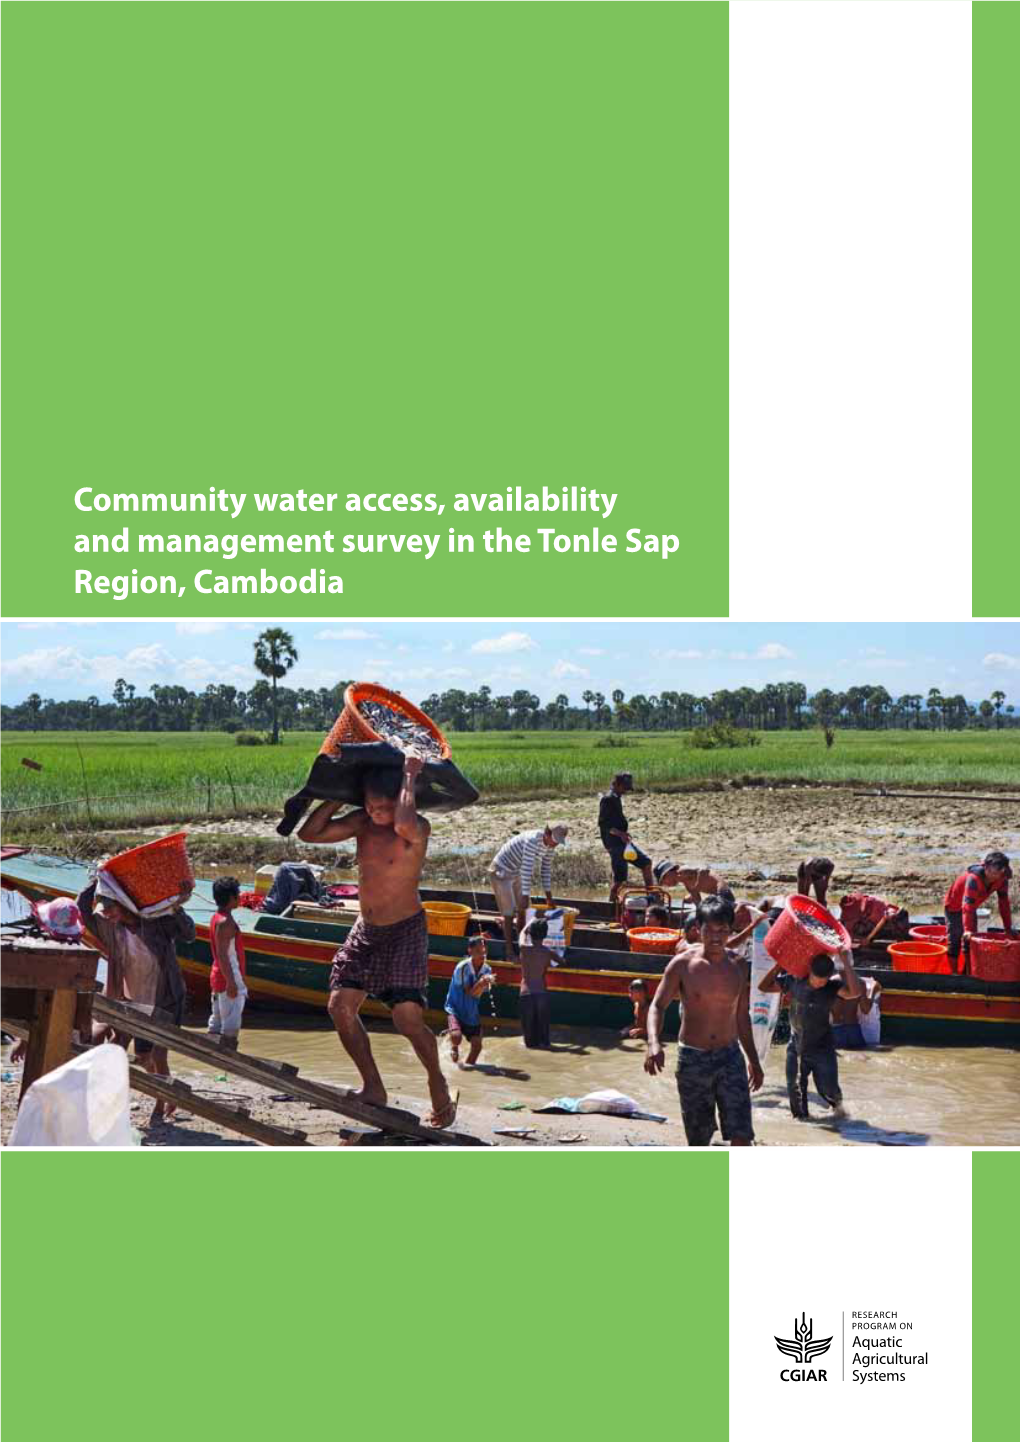 Community Water Access, Availability and Management Survey in the Tonle Sap Region, Cambodia COMMUNITY WATER ACCESS, AVAILABILITY AND